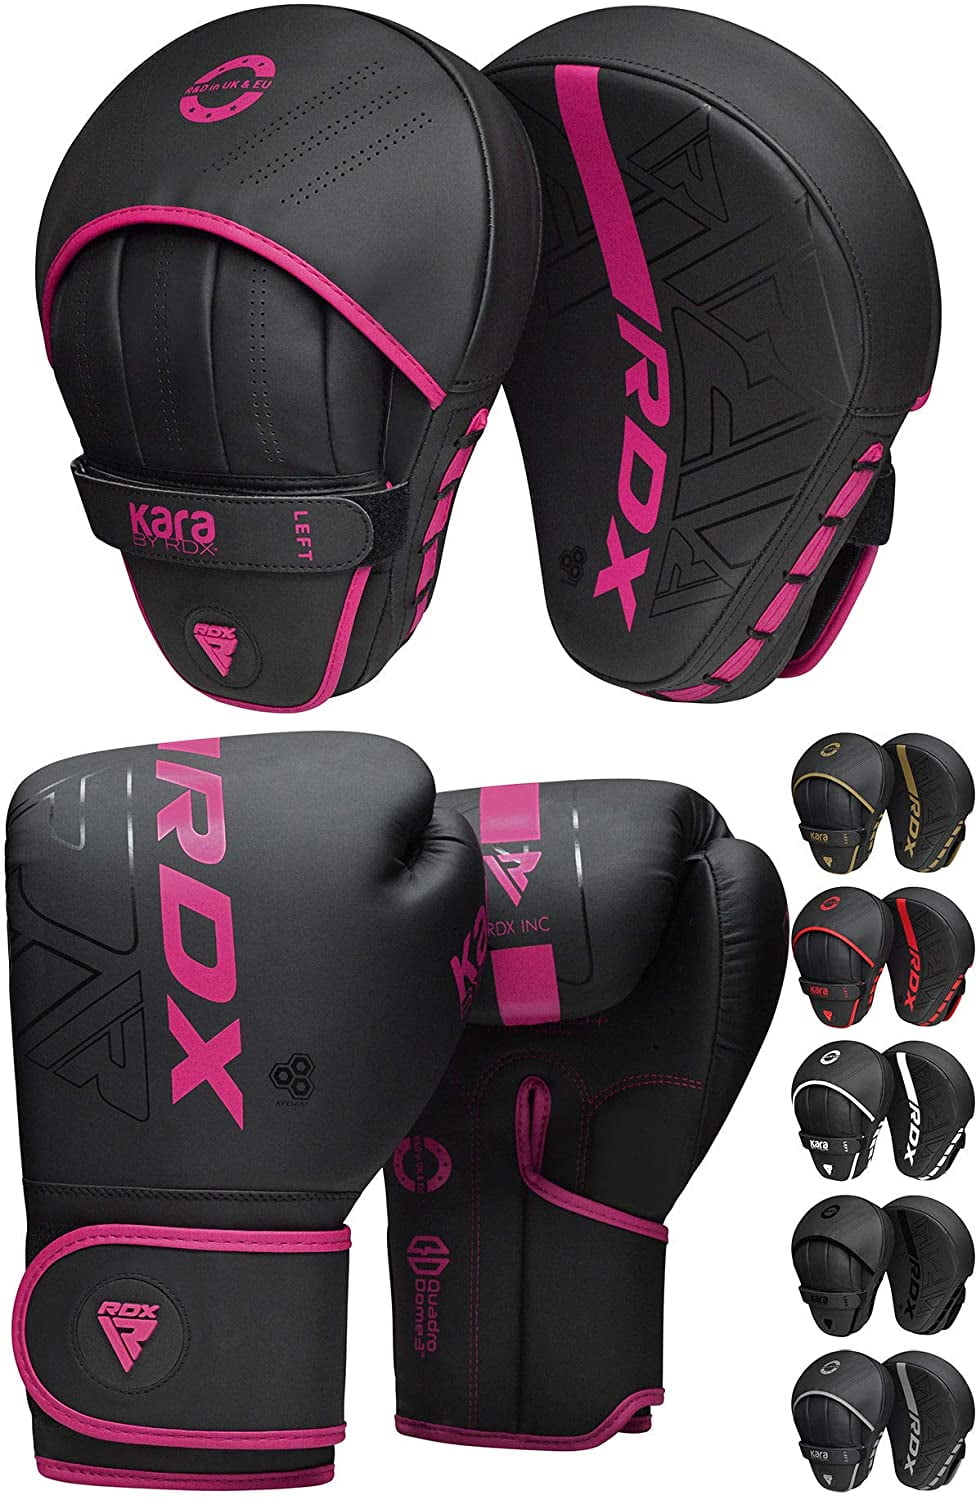 Women Focus Pads and Boxing Gloves Set Hook & Jabs Mitts Ladies MMA Fight 